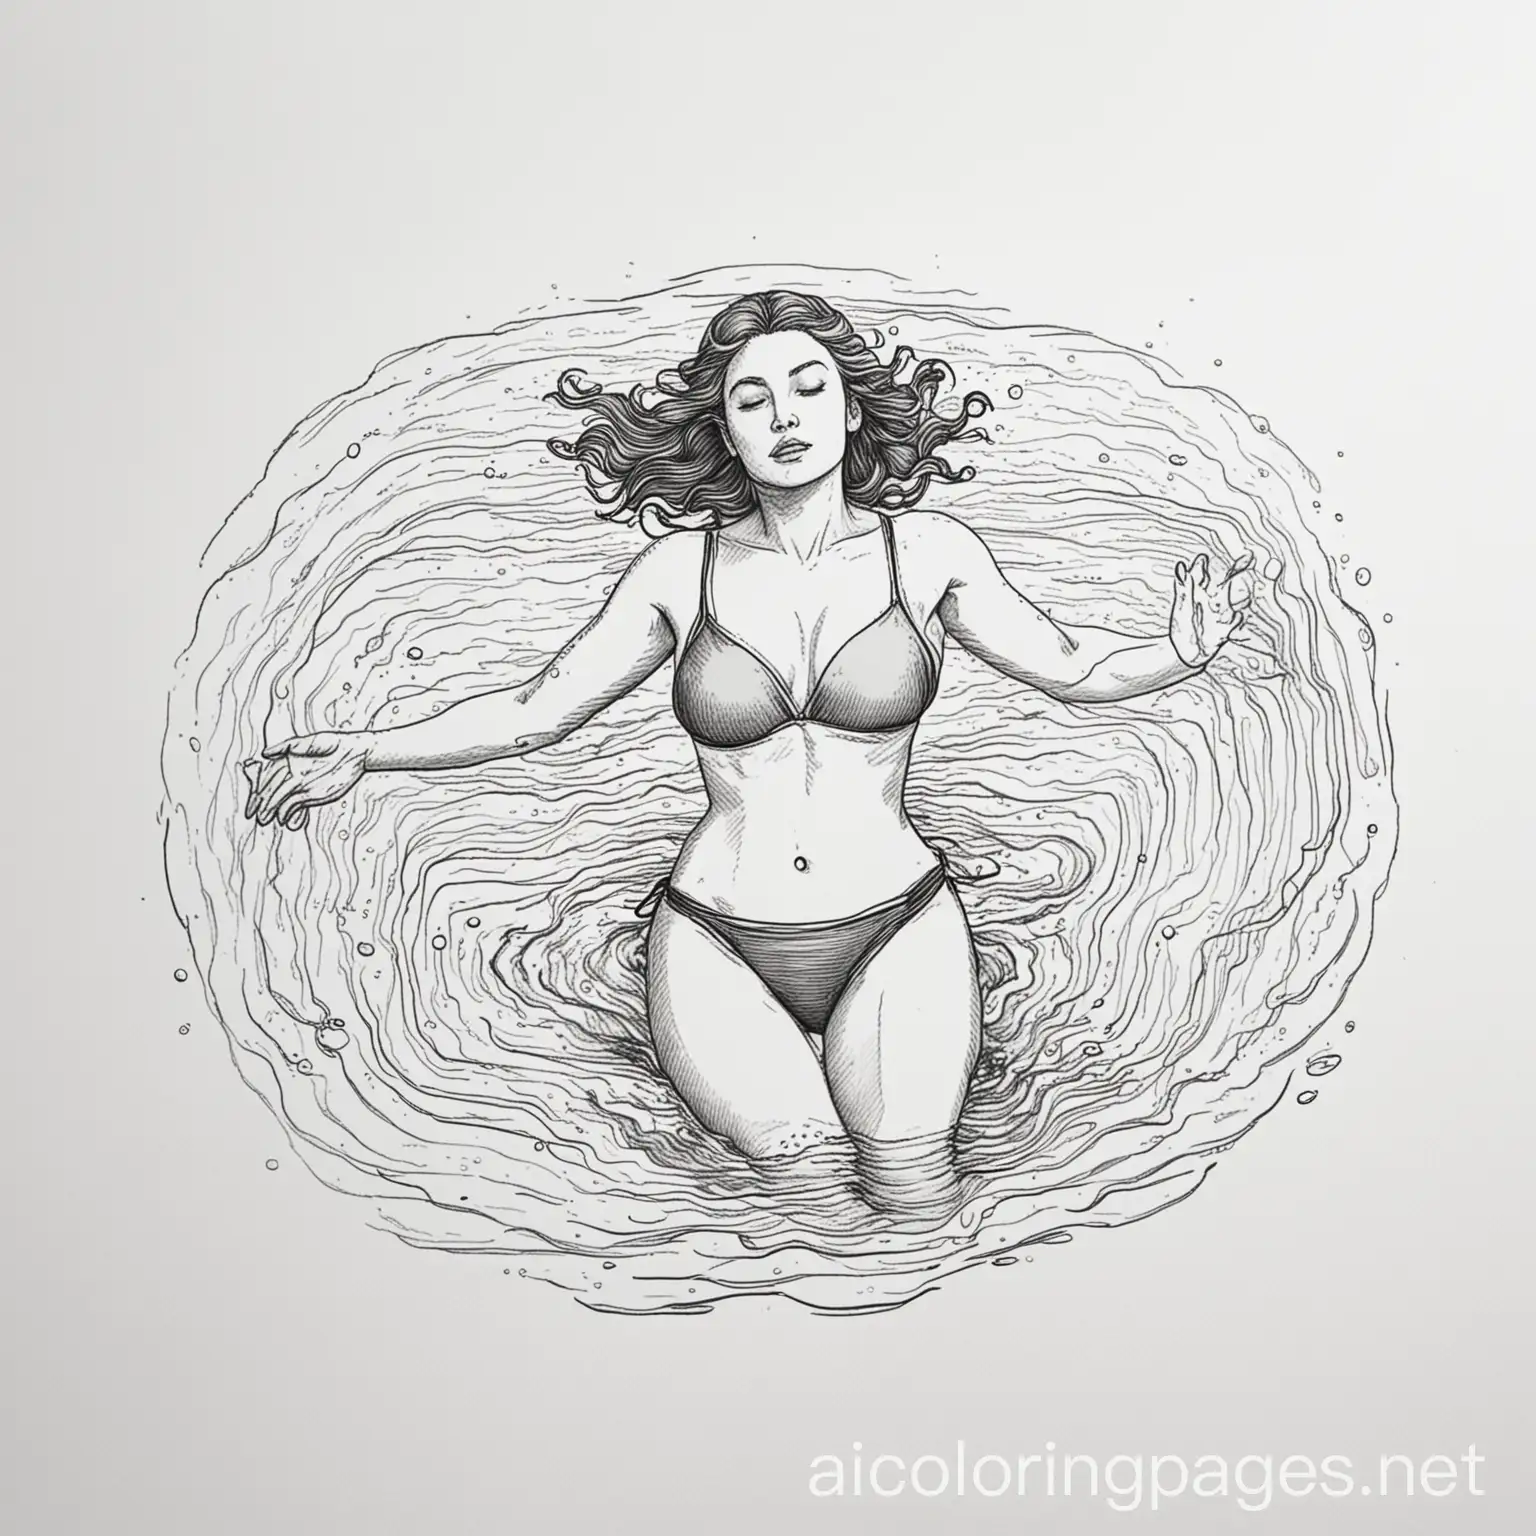 a woman swimming in a body of water, Coloring Page, black and white, line art, white background, Simplicity, Ample White Space. The background of the coloring page is plain white to make it easy for young children to color within the lines. The outlines of all the subjects are easy to distinguish, making it simple for kids to color without too much difficulty